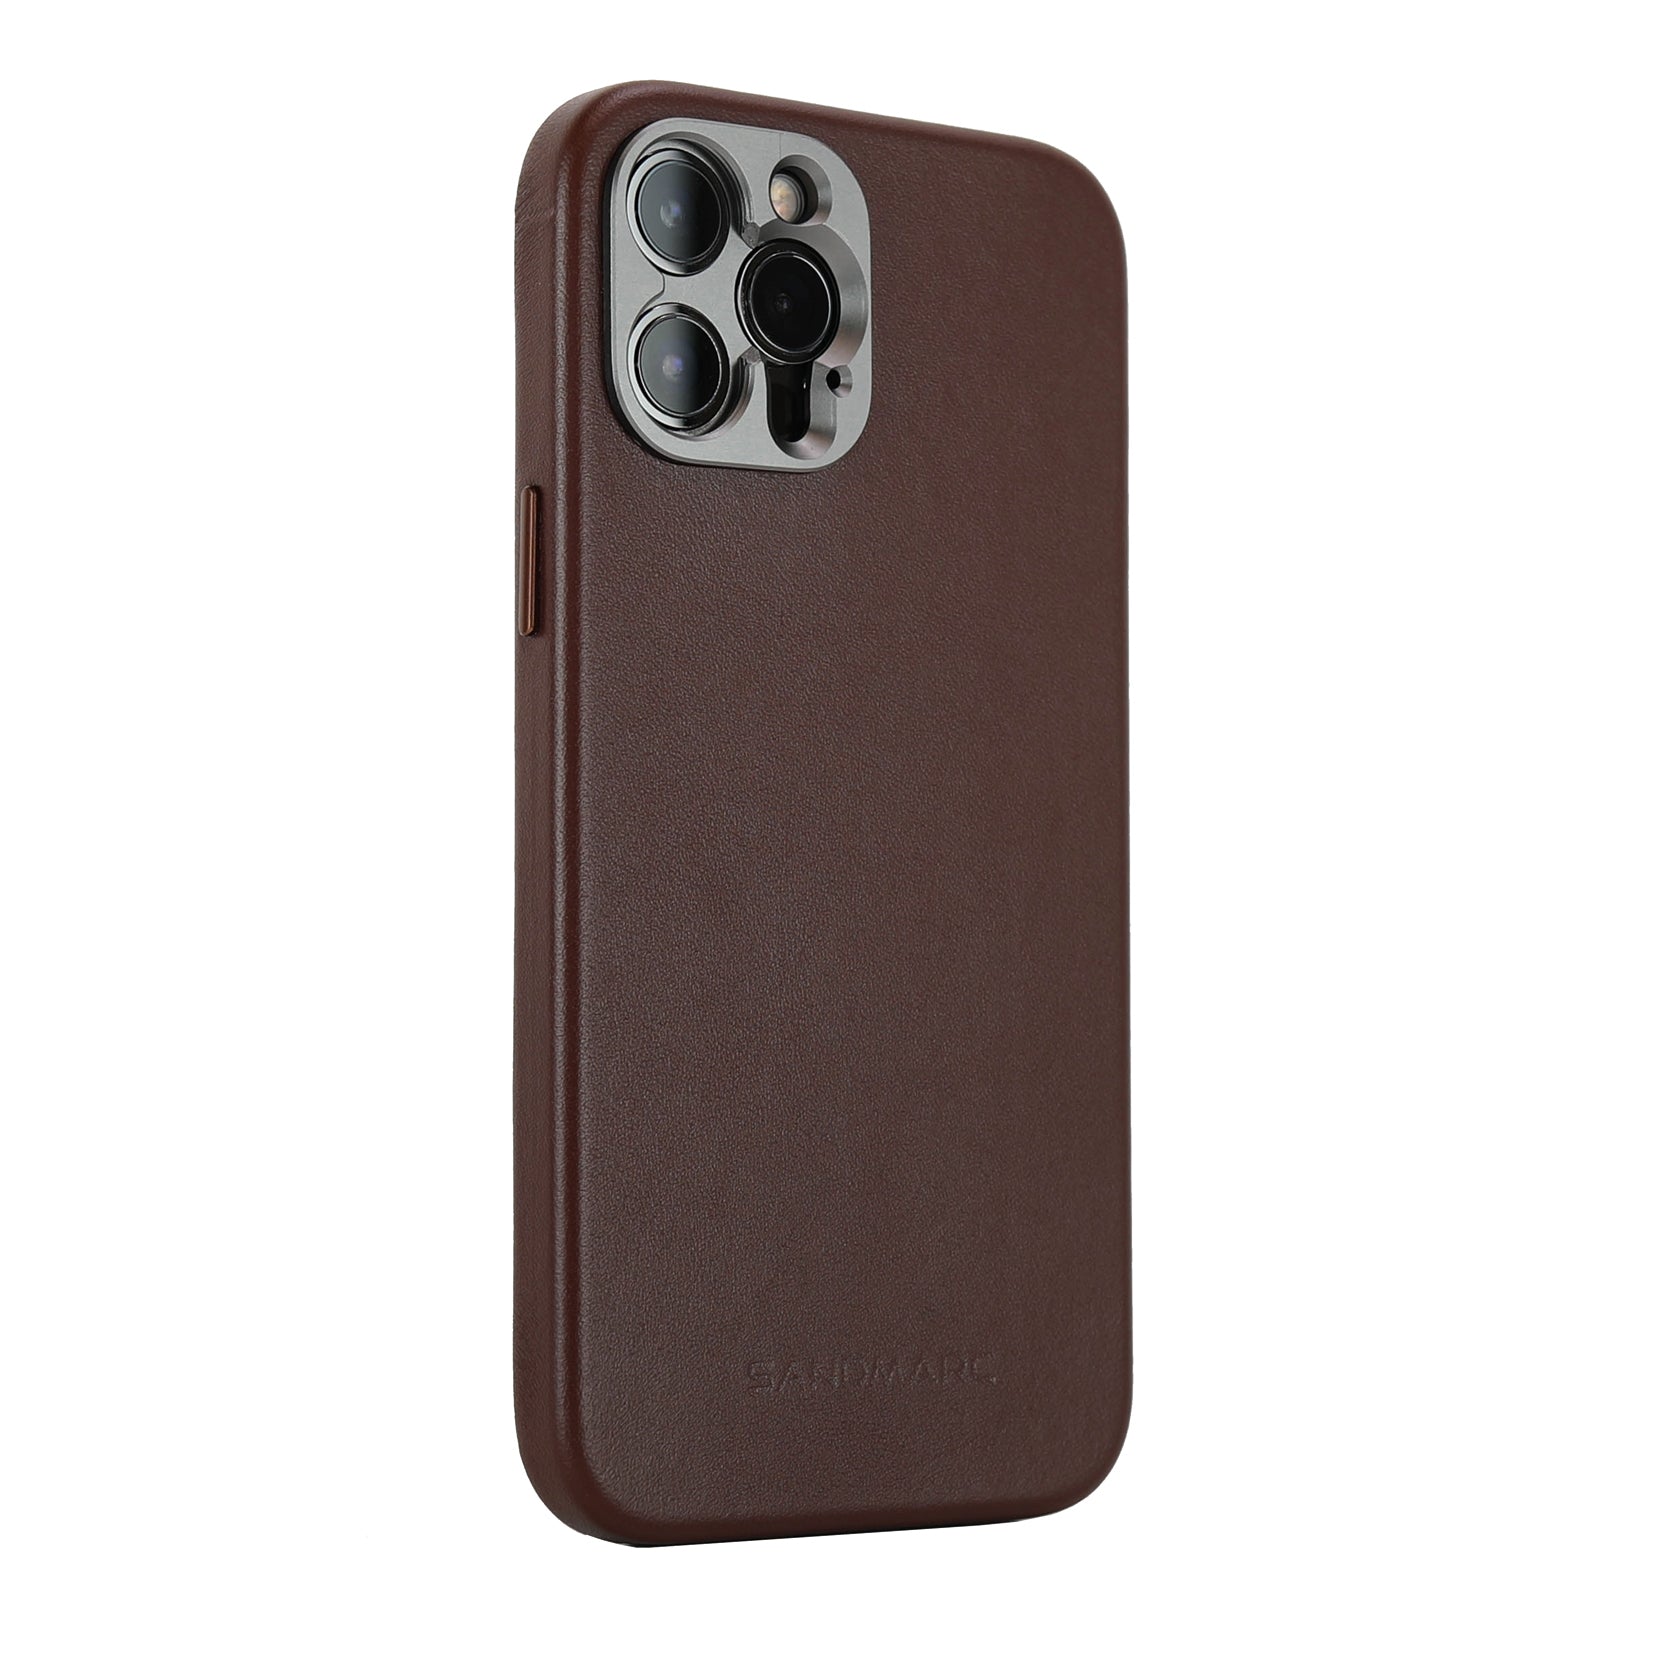 Pro Leather Case for iPhone 12 Pro Max with MagSafe Charging